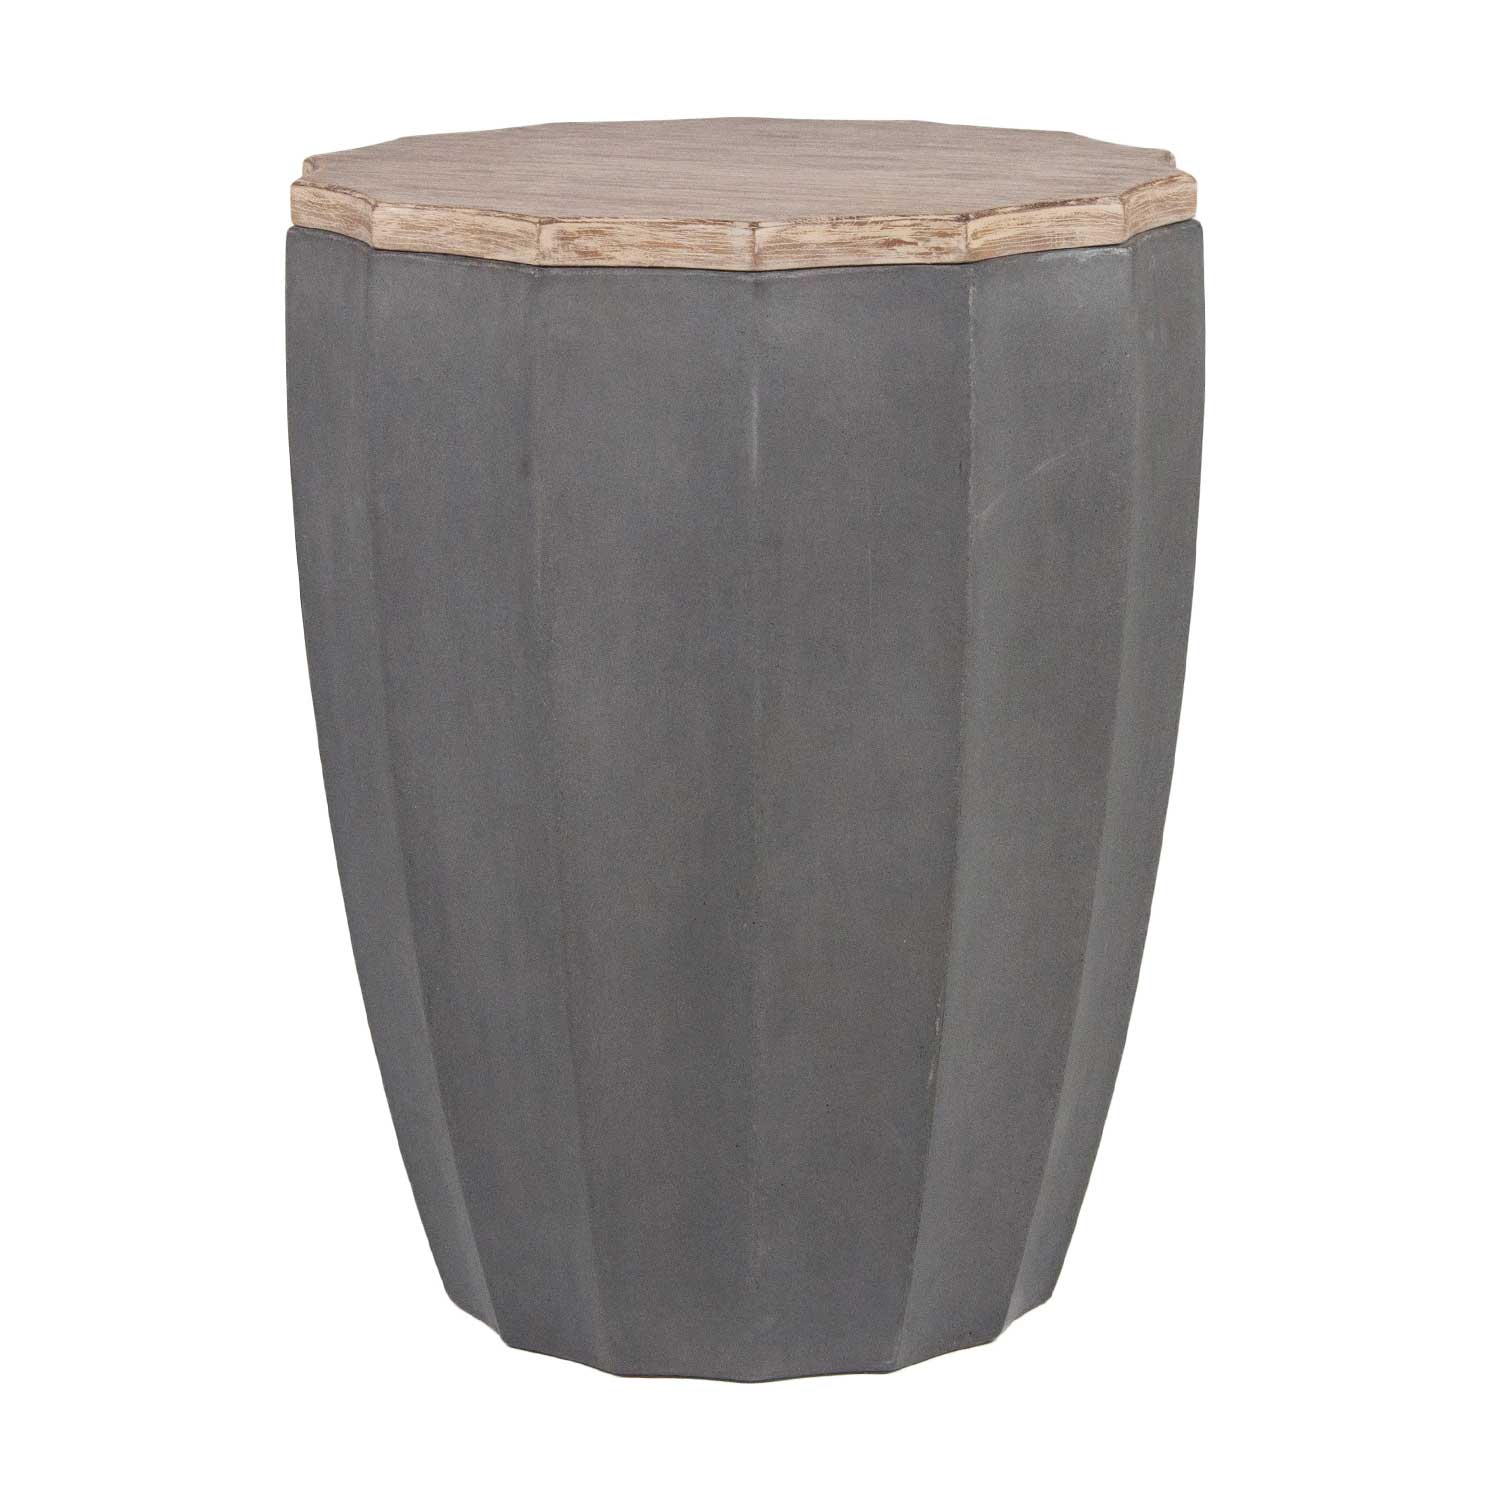 rue side table product image